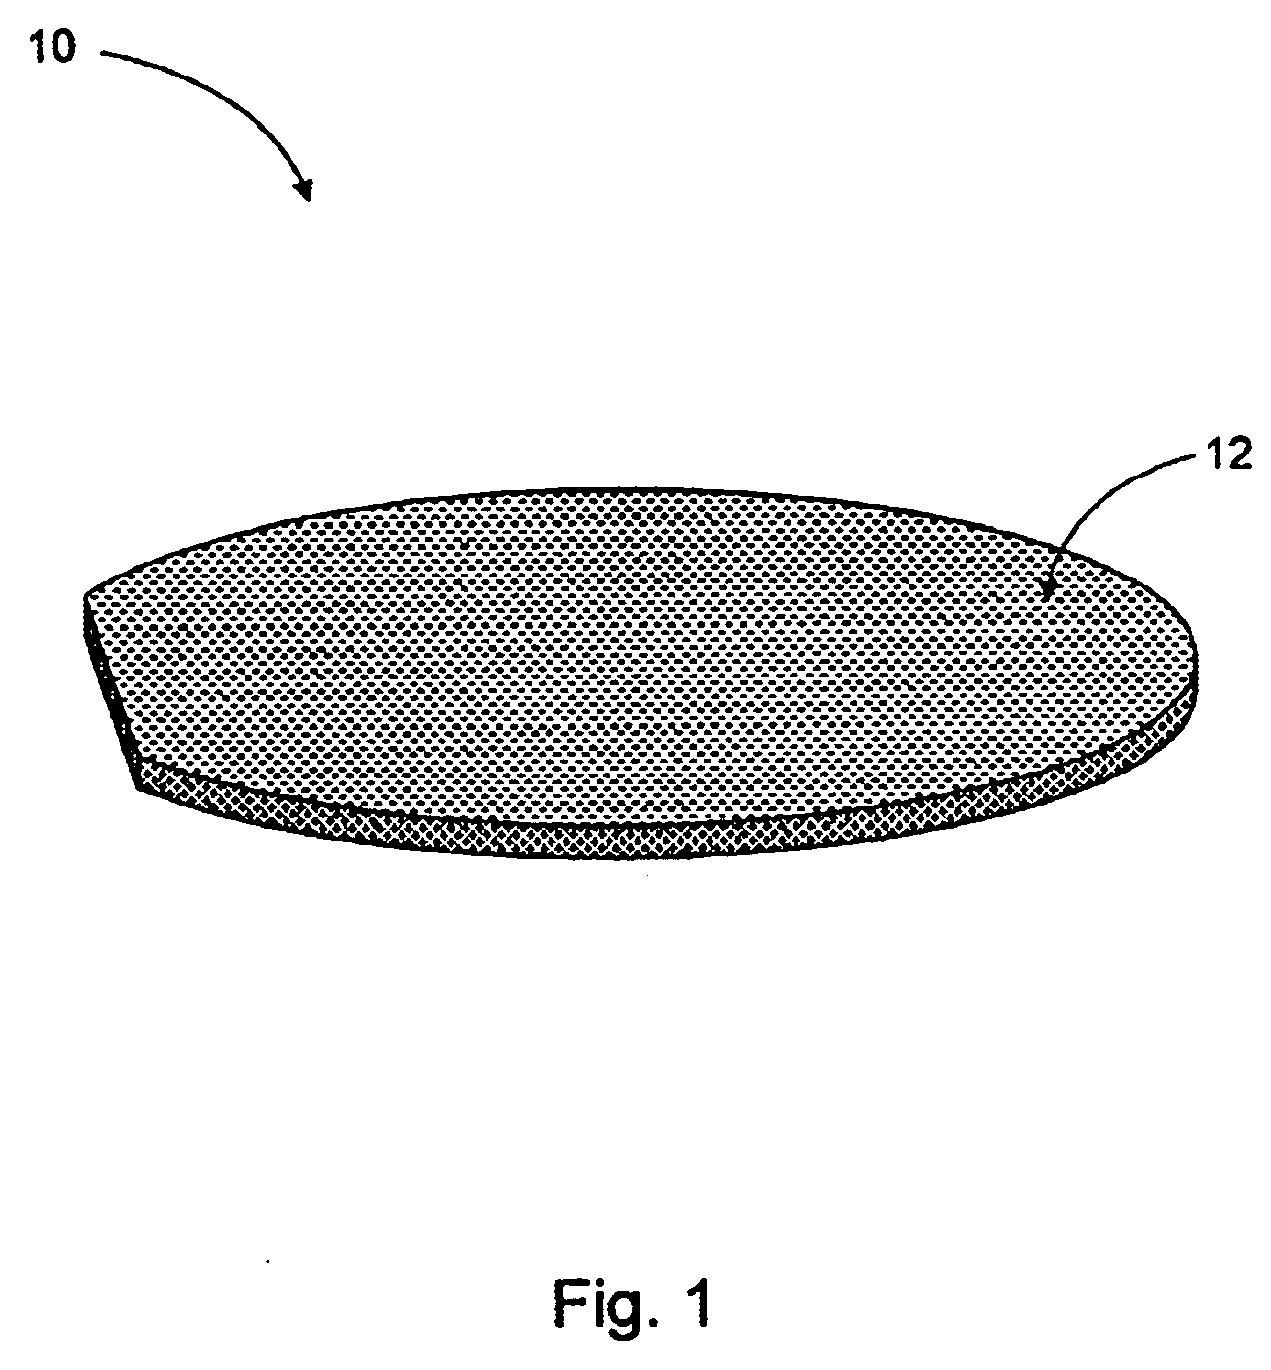 Easily loaded and unloaded getter device for reducing evacuation time and contamination in a vacuum chamber and method for use of same